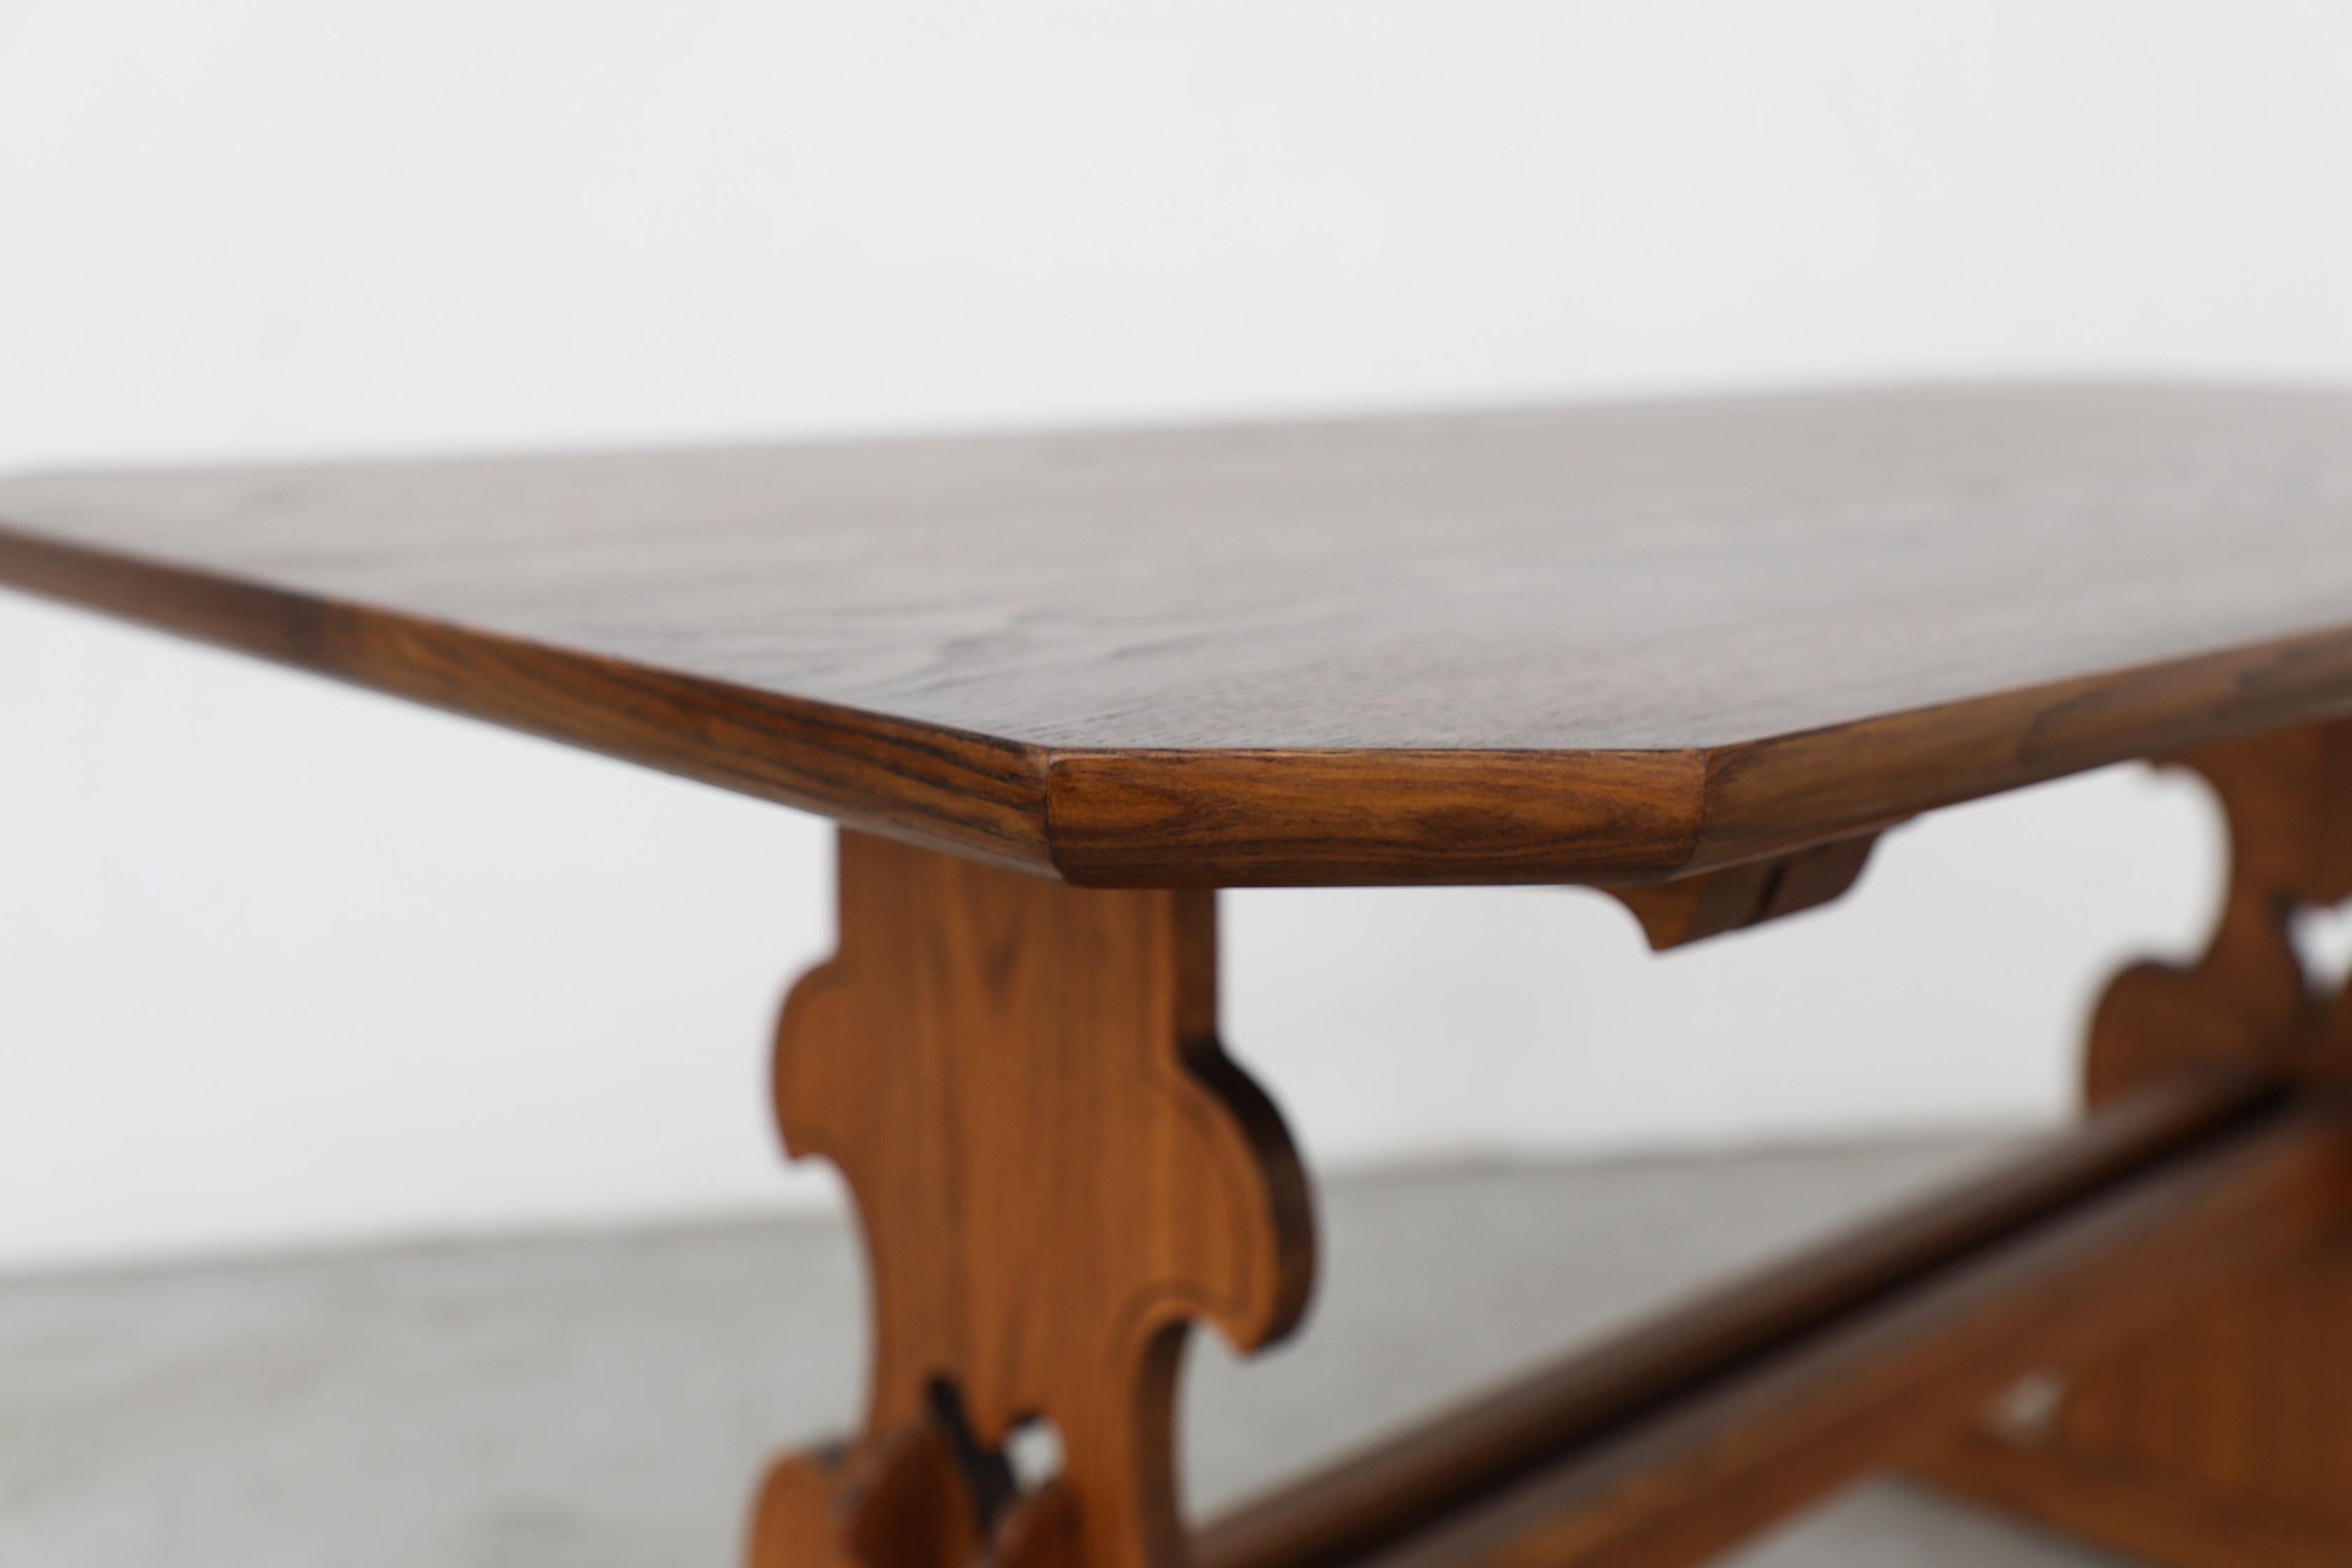 Austrian Ornate Brutalist Tyrolean Style Dark Pine Table with Angled Corners For Sale 4